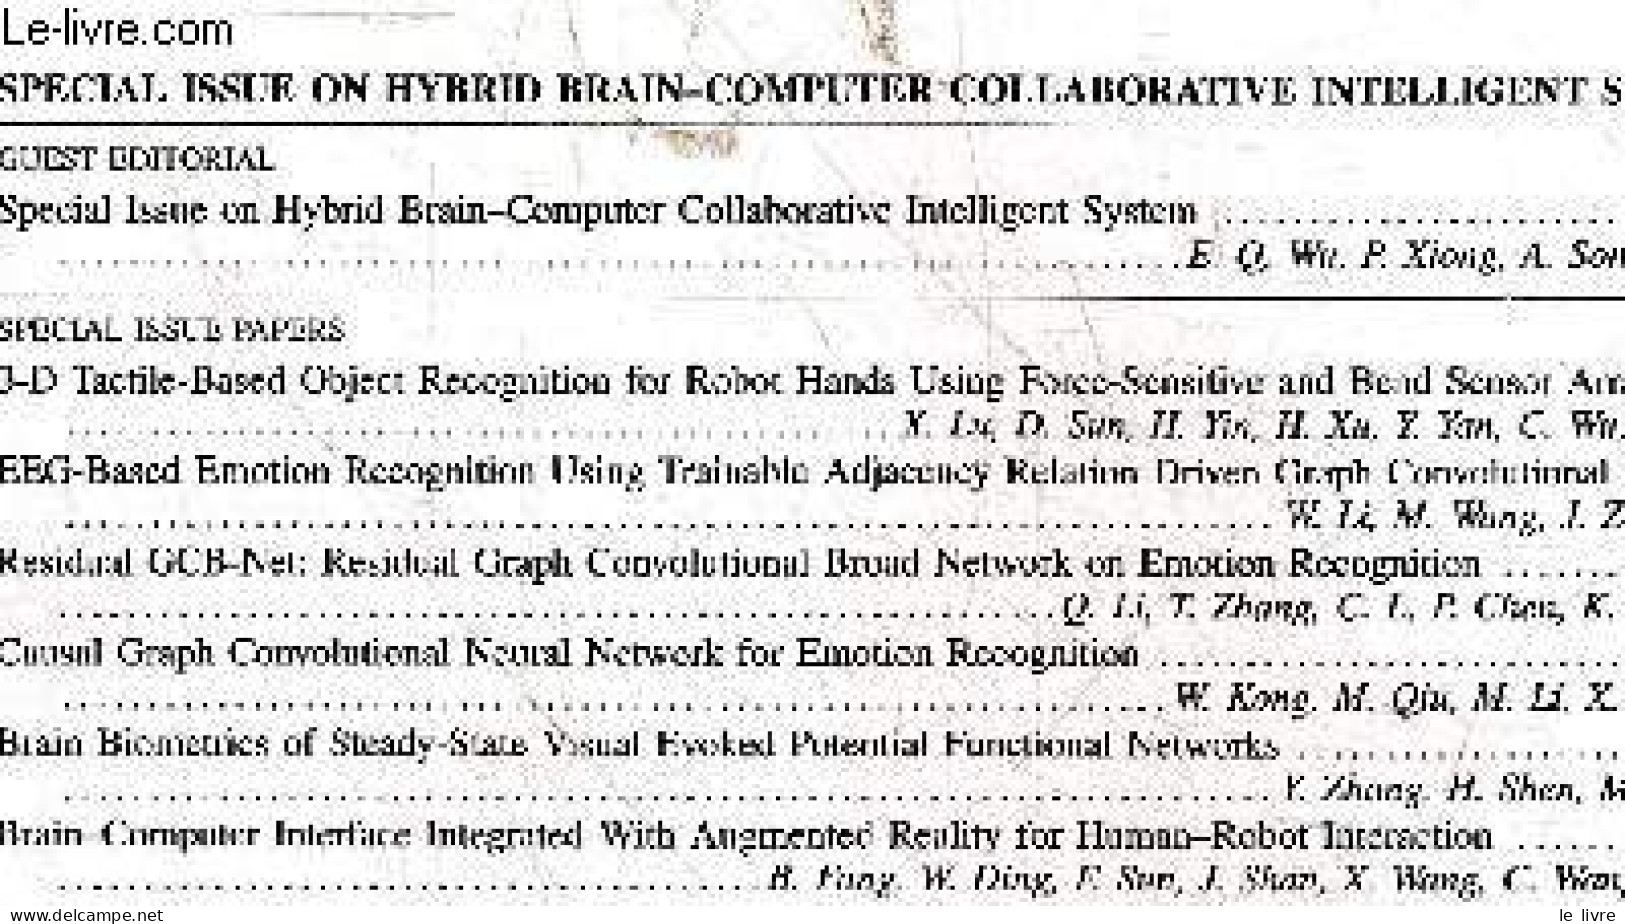 IEEE TRANSACTIONS ON COGNITIVE AND DEVELOPMENTAL SYSTEMS - DECEMBER 2023, VOLUME 15, N°4 - Special Issue On Hybrid Brain - Linguistica